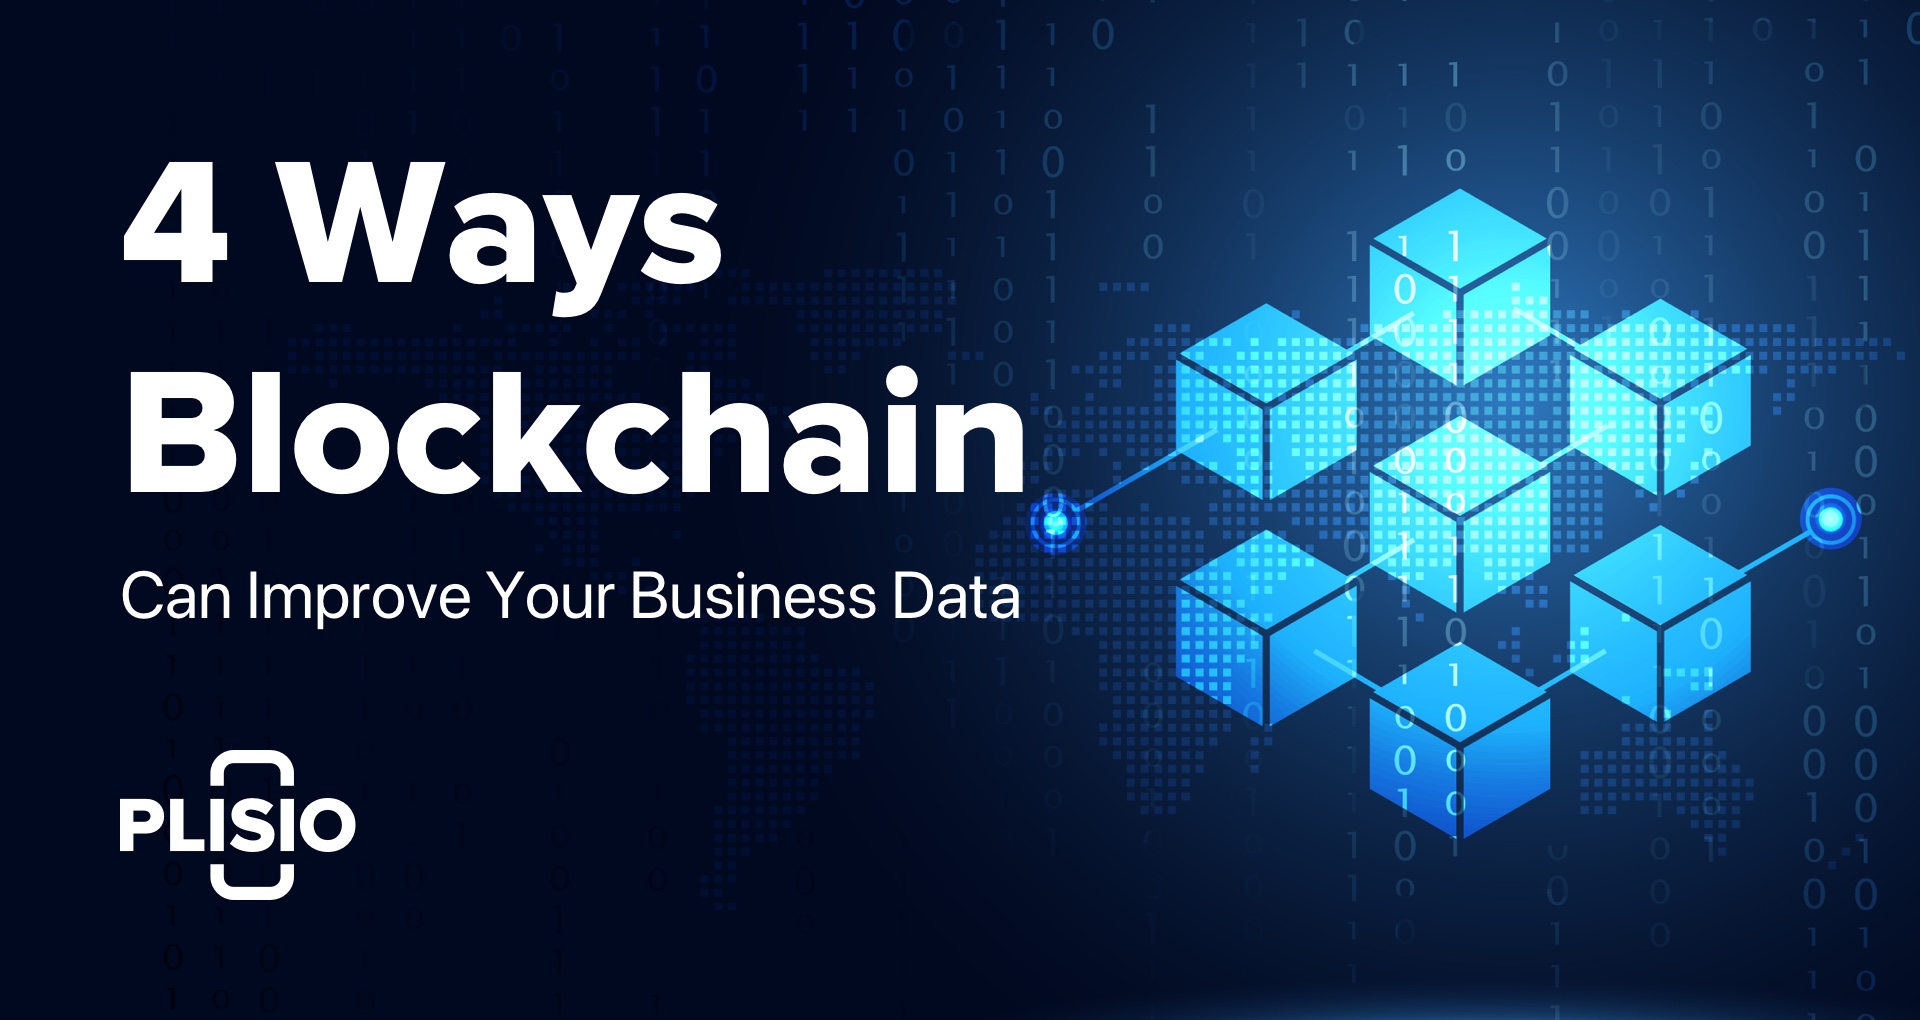 4 Ways Blockchain Can Improve Your Business Data